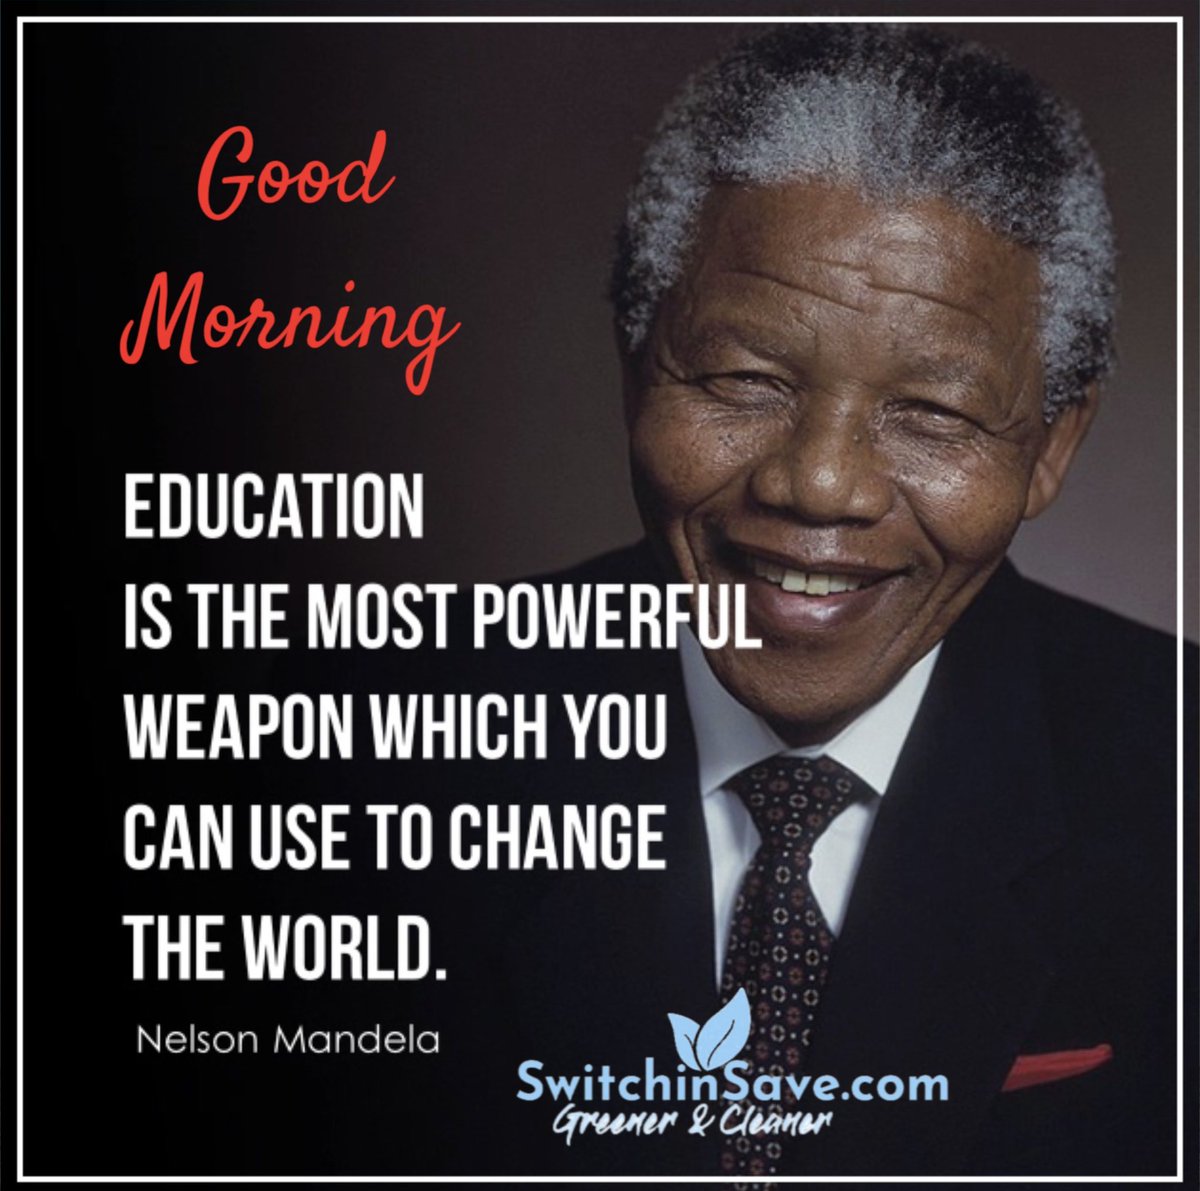 Thought about how much power lies in education? As a fan of epic anime sagas, I'm all about stories where knowledge is might and changes destinies. Like Mandela said: it's the ultimate game-changer. So let's level up our learning and transform our world bit by bit! #EducationWins